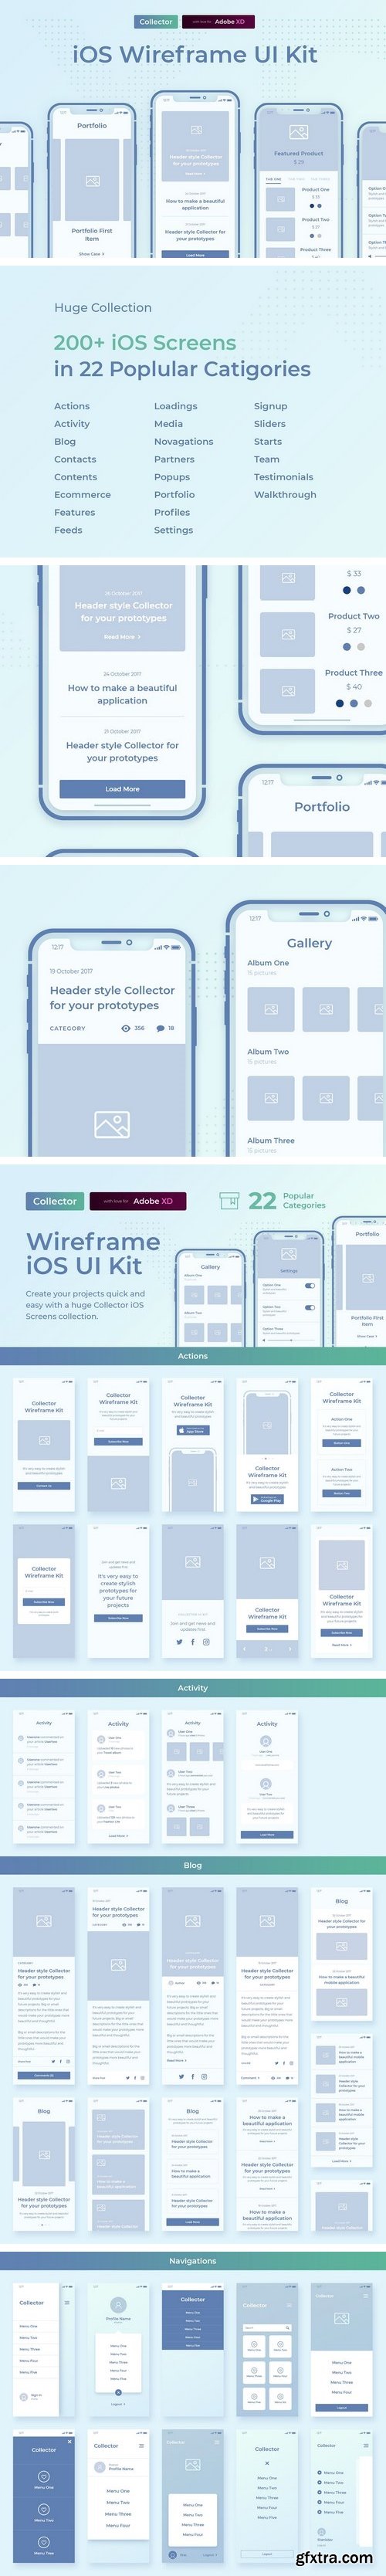 CM - Collector iOS Wireframe UI Kit 2144499